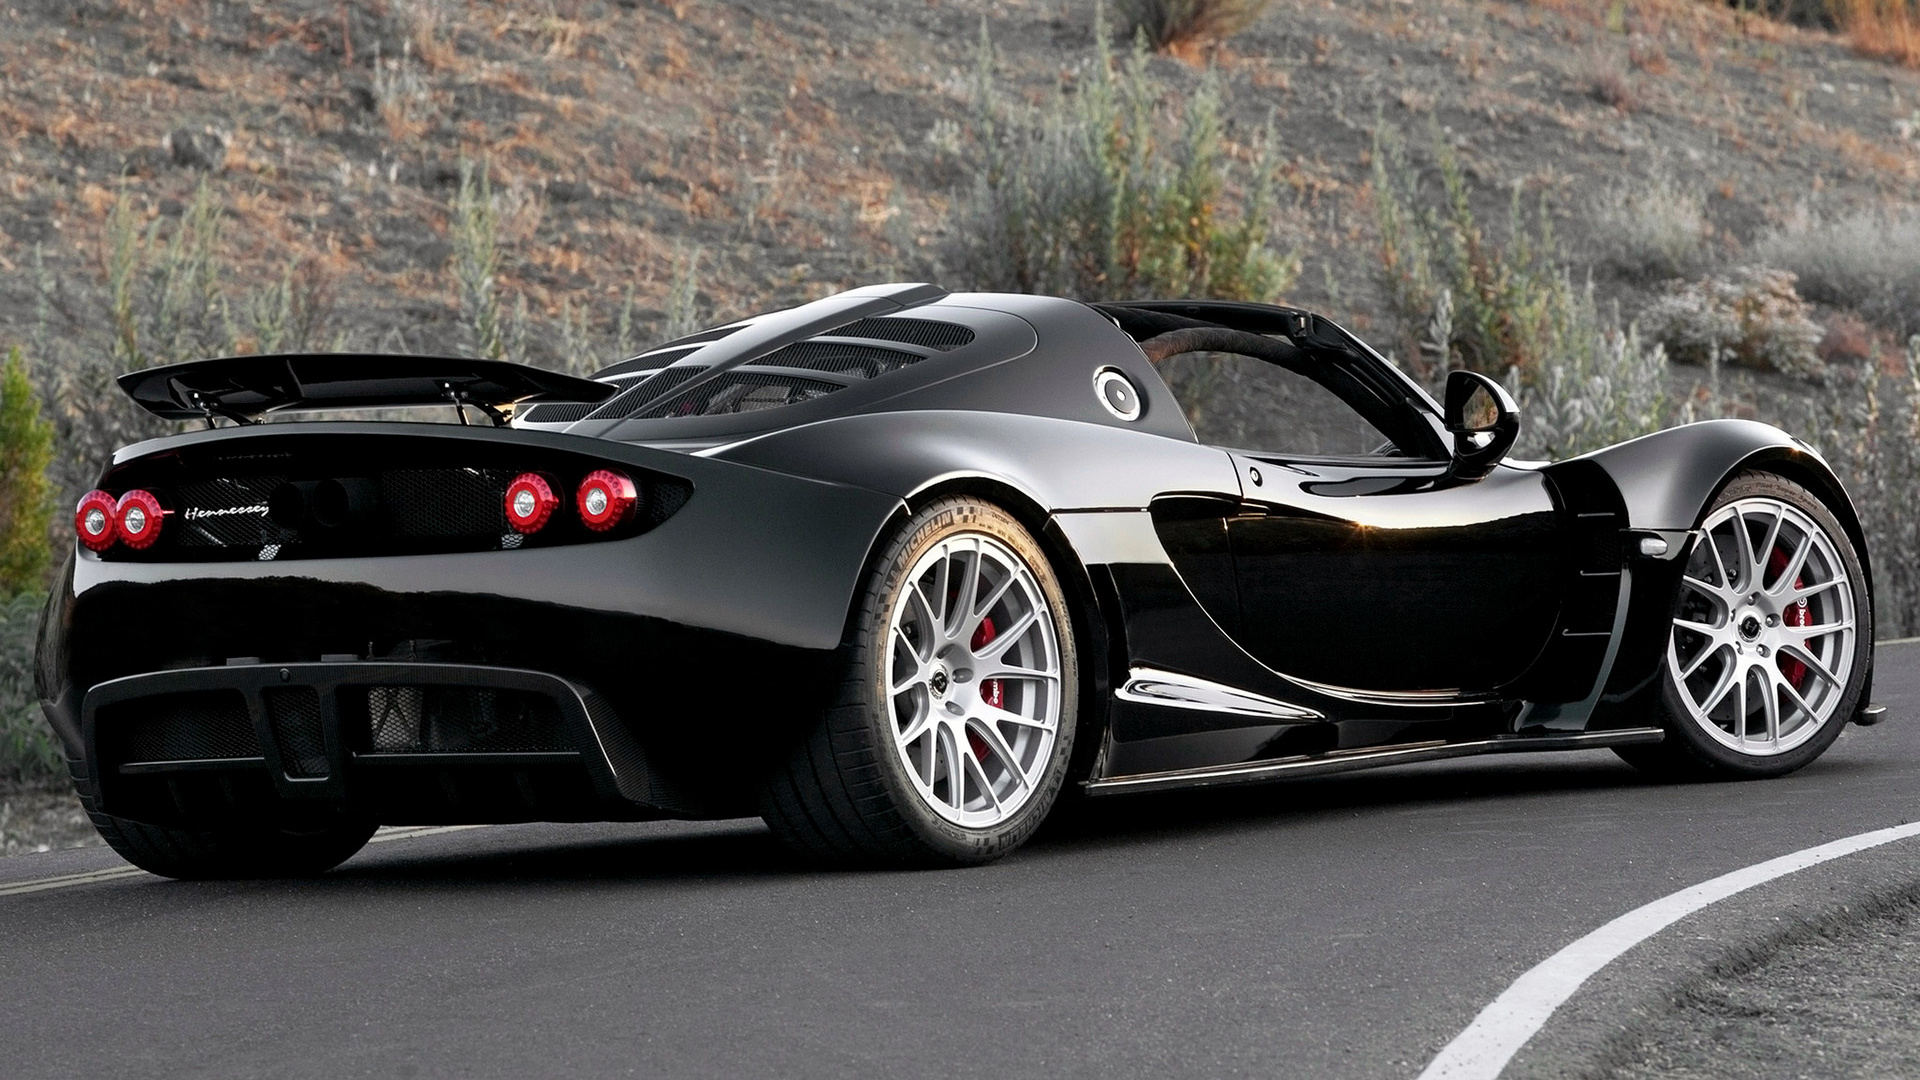 Hennessey Venom GT Spyder 2013 Wallpapers and HD Images 1920x1080